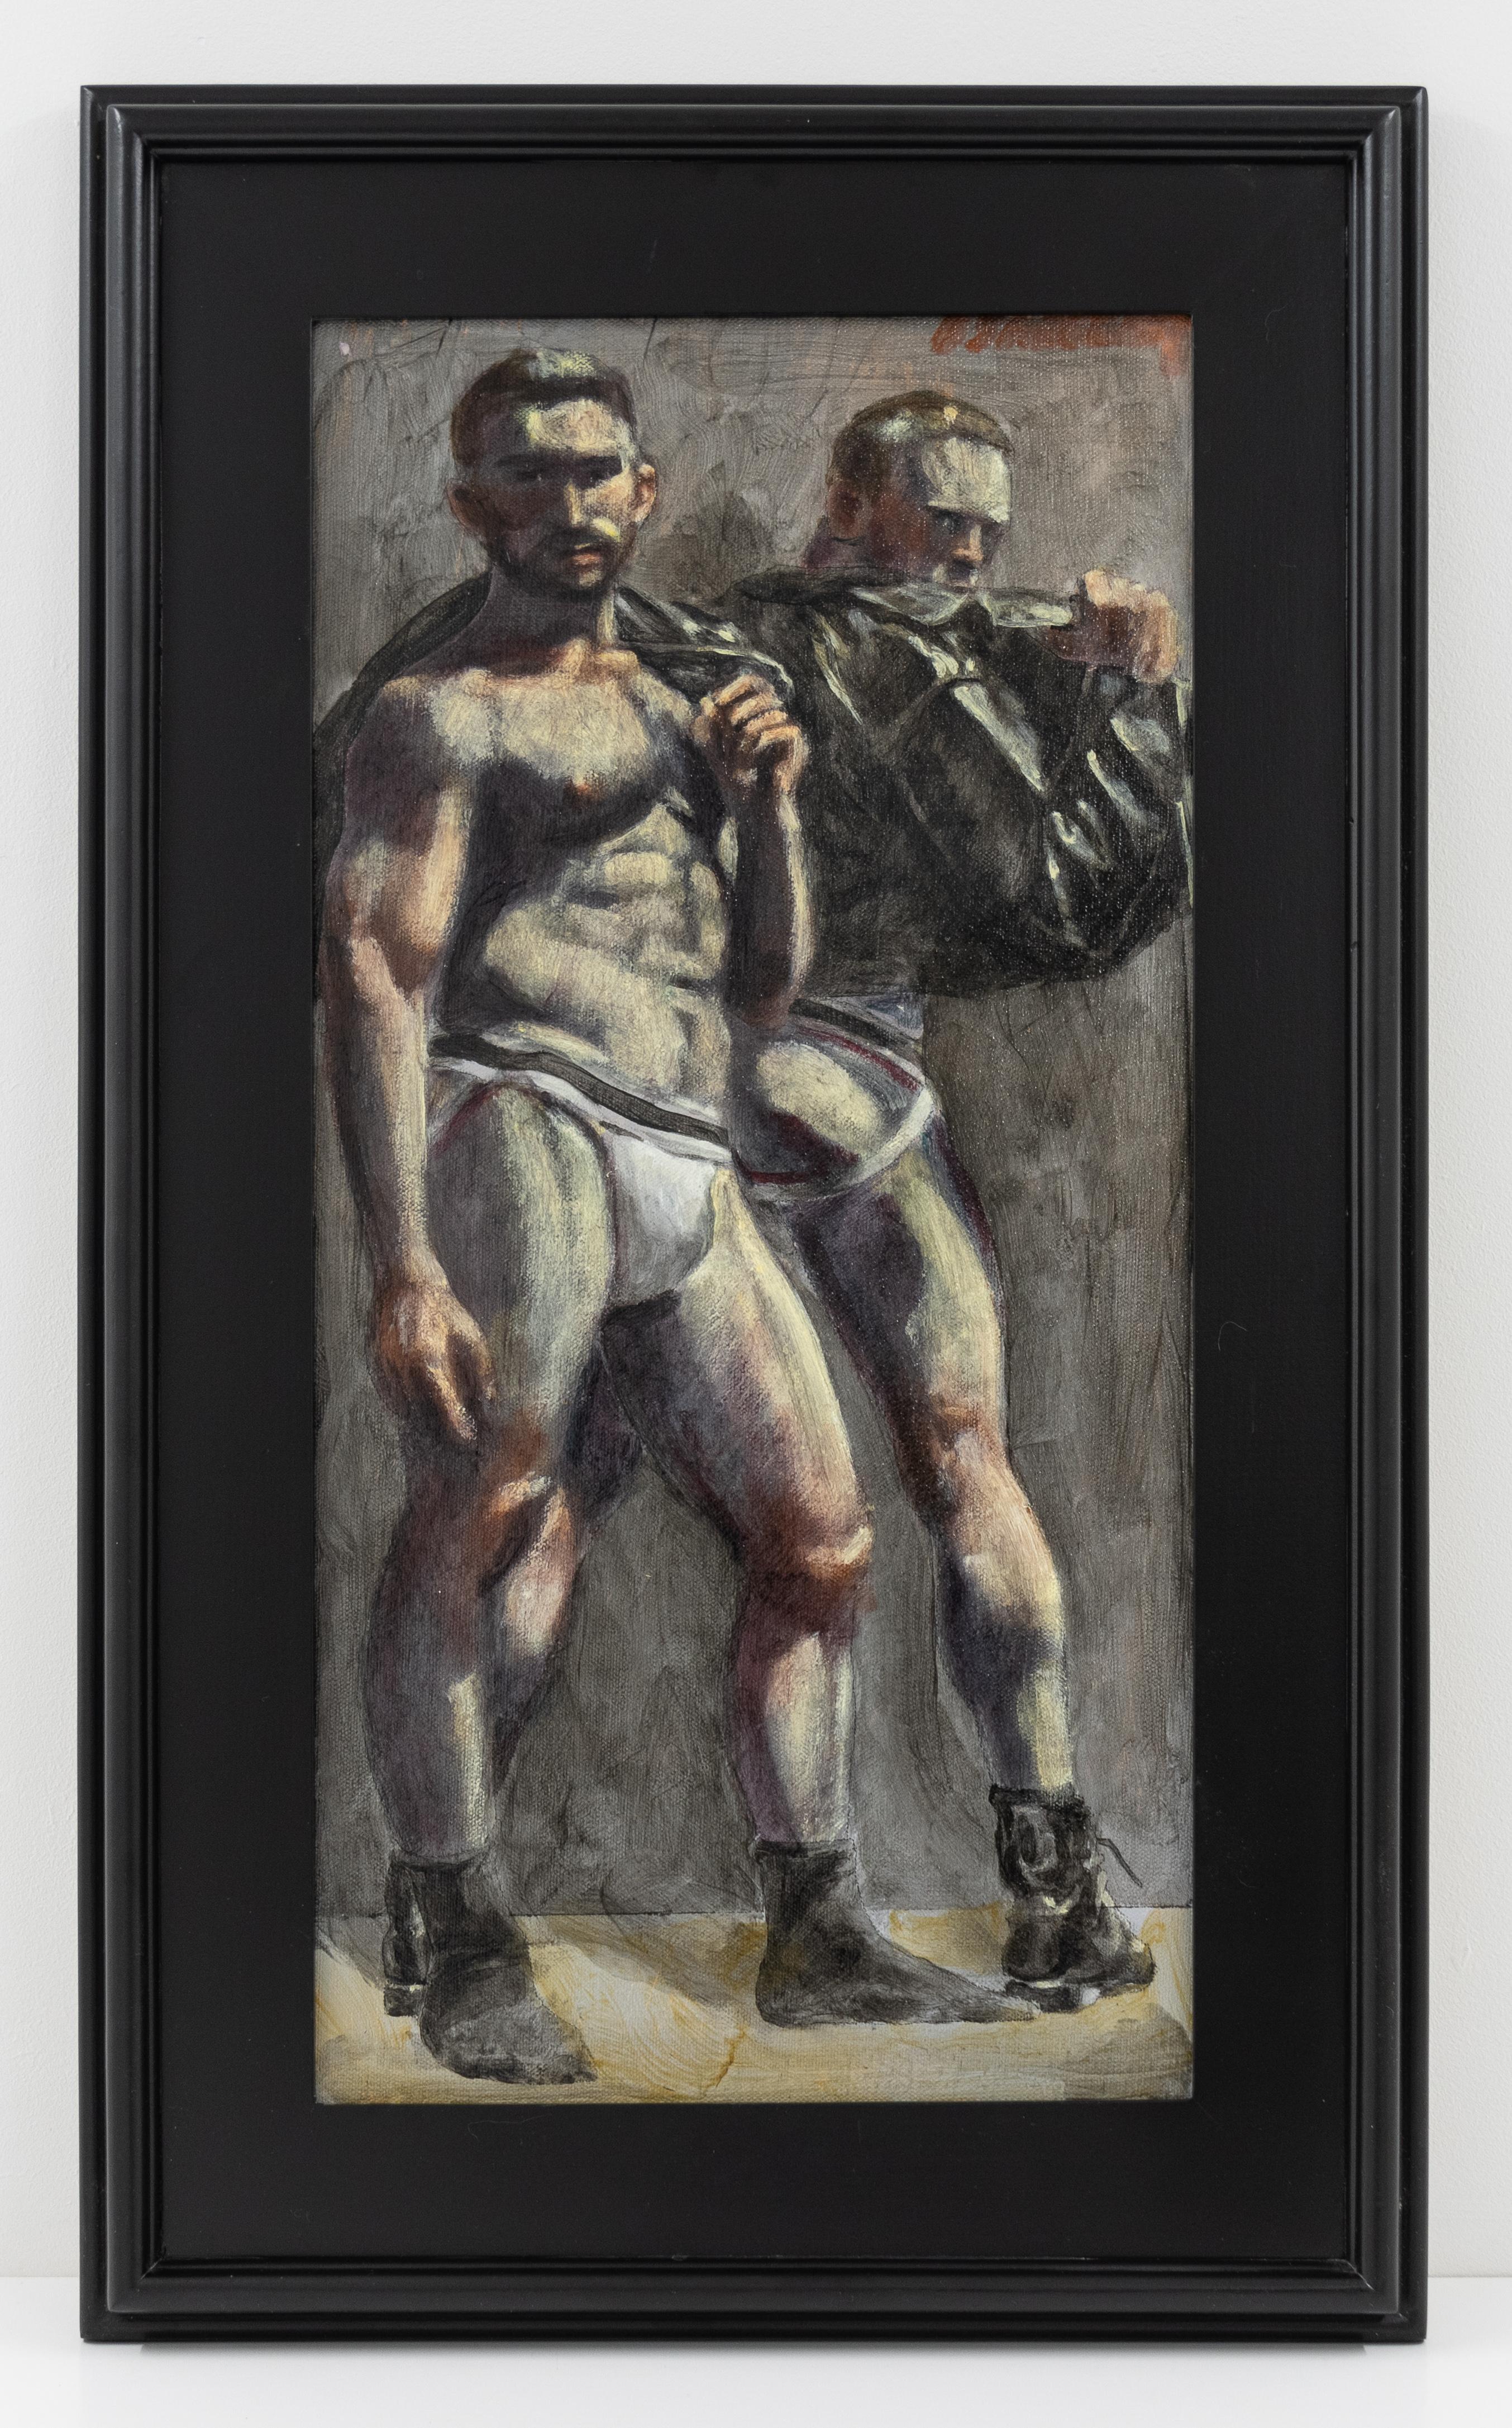 [Bruce Sargeant (1898-1938)] Two Men in Leather Jackets and Jockstraps - Painting by Mark Beard